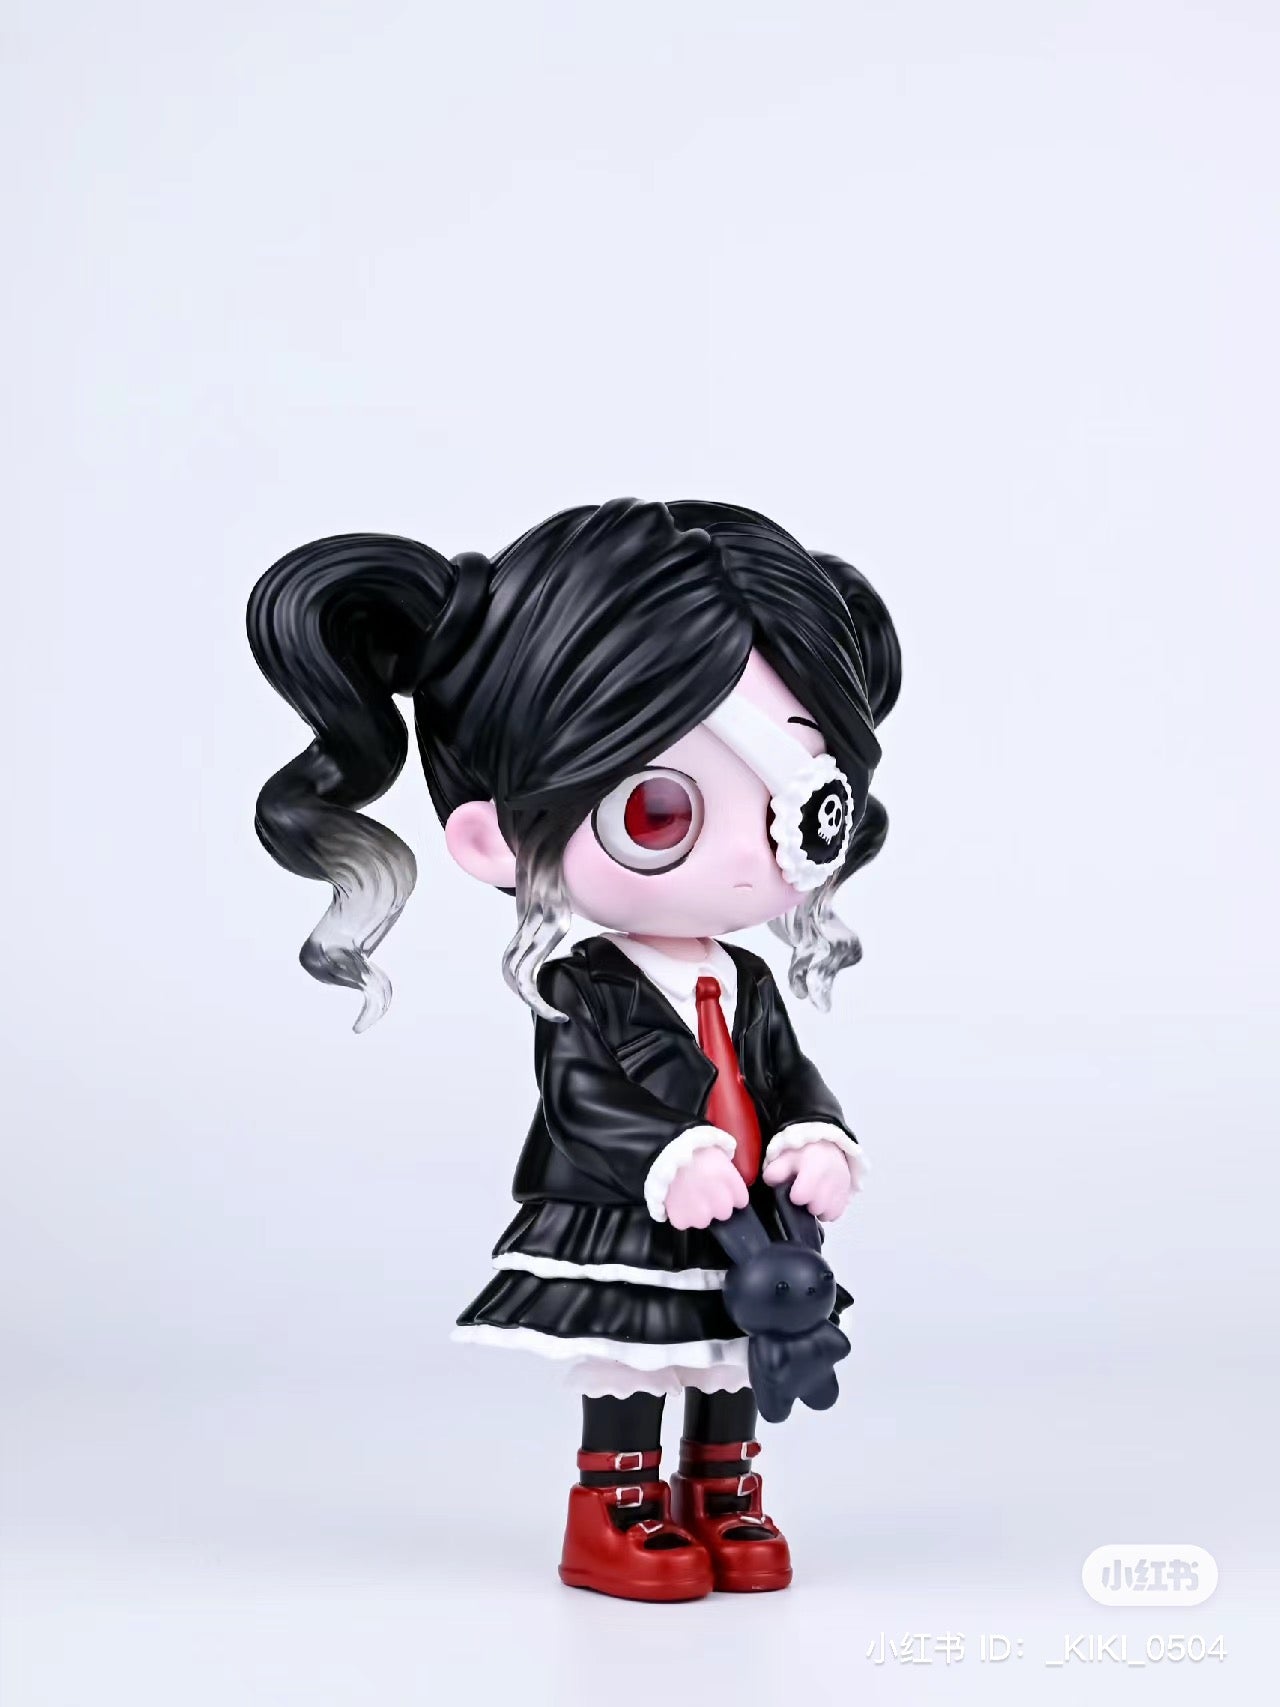 Alt text: Kiki Girls 4.0 toy figurine, 11cm resin/PVC, depicting a girl character with a skull eye patch.